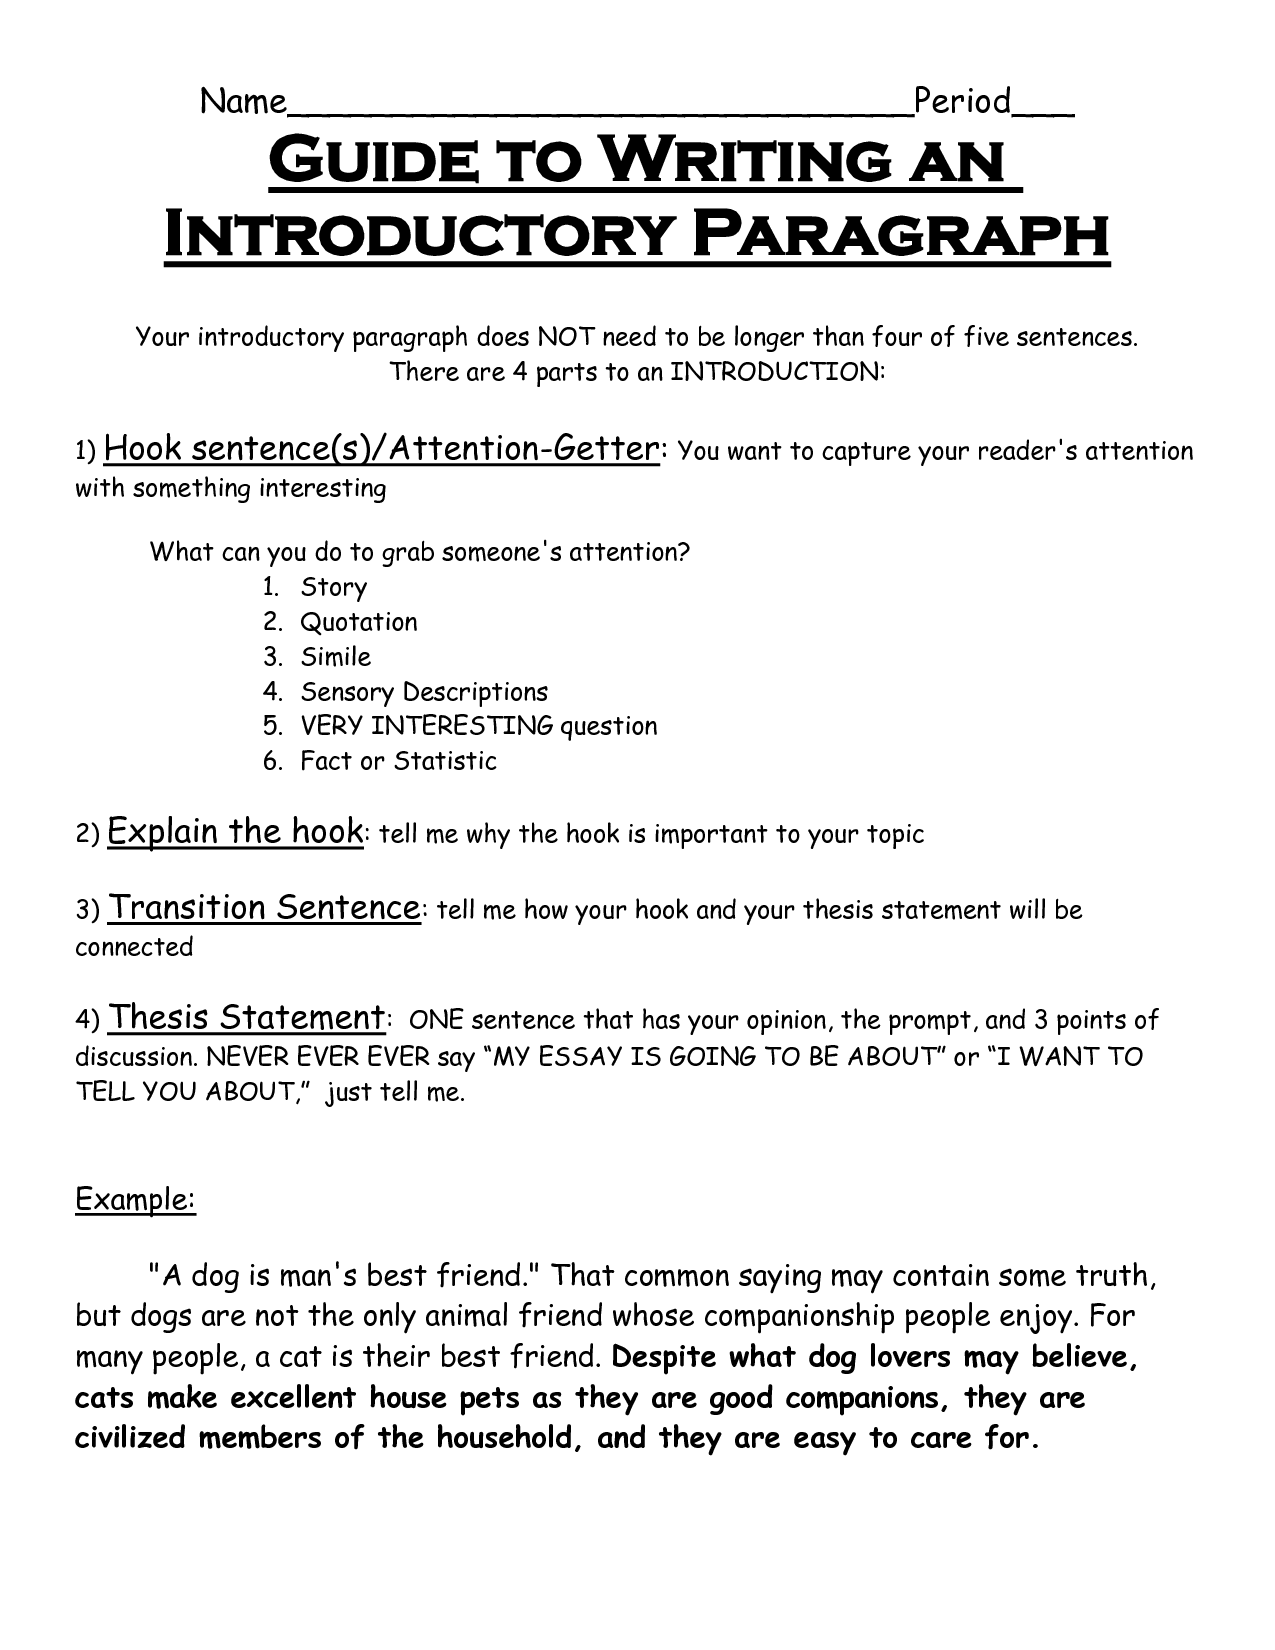 How to write an introduction to an essay example